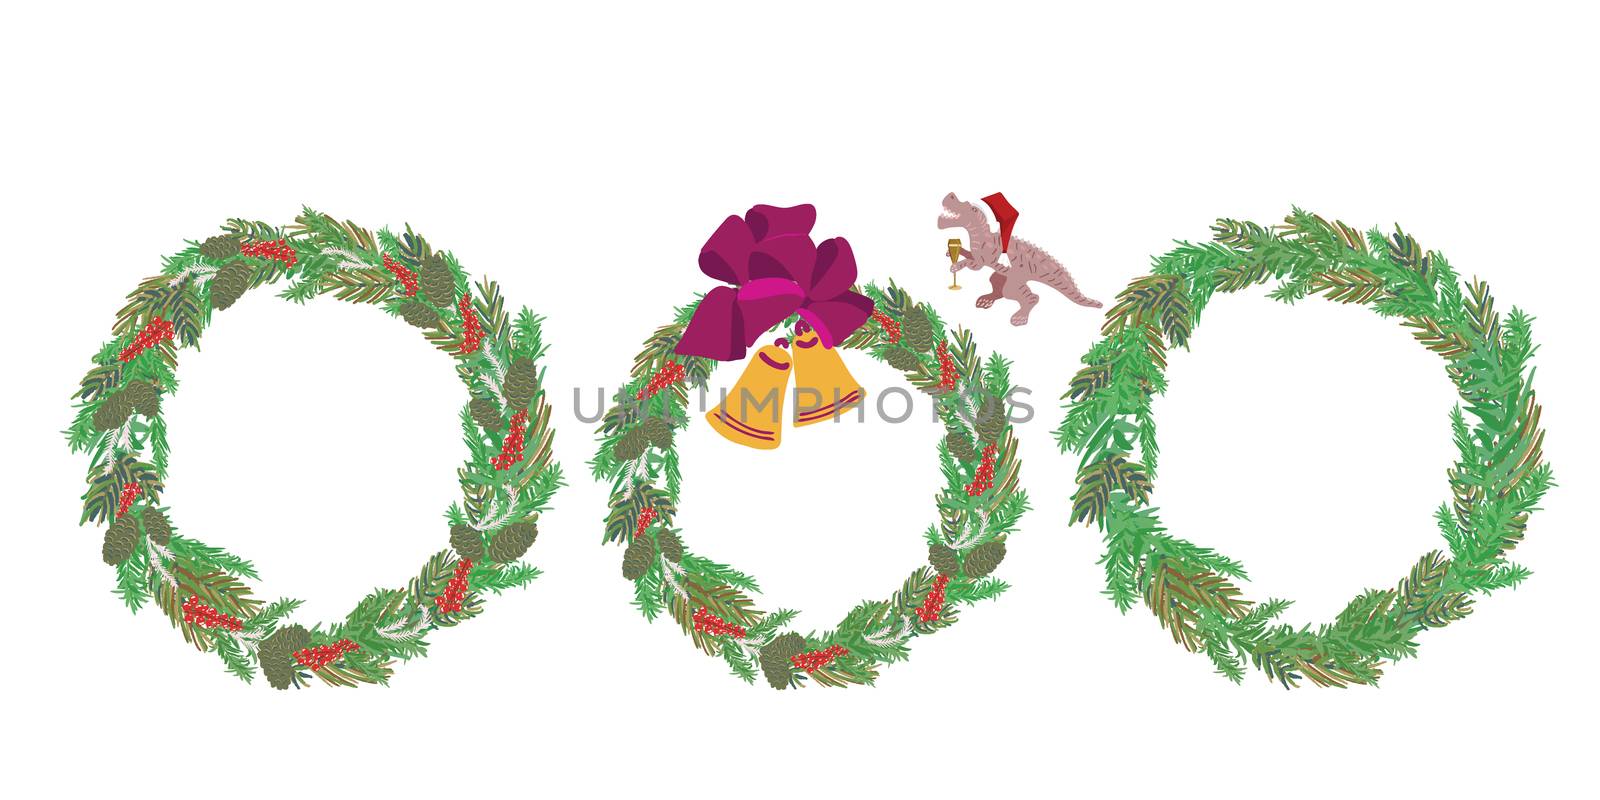 Christmas wreath set of three with dino santa isolated on white background. Festive decoration for print, cards, stickers, apparel, home decor. Vector illustration.